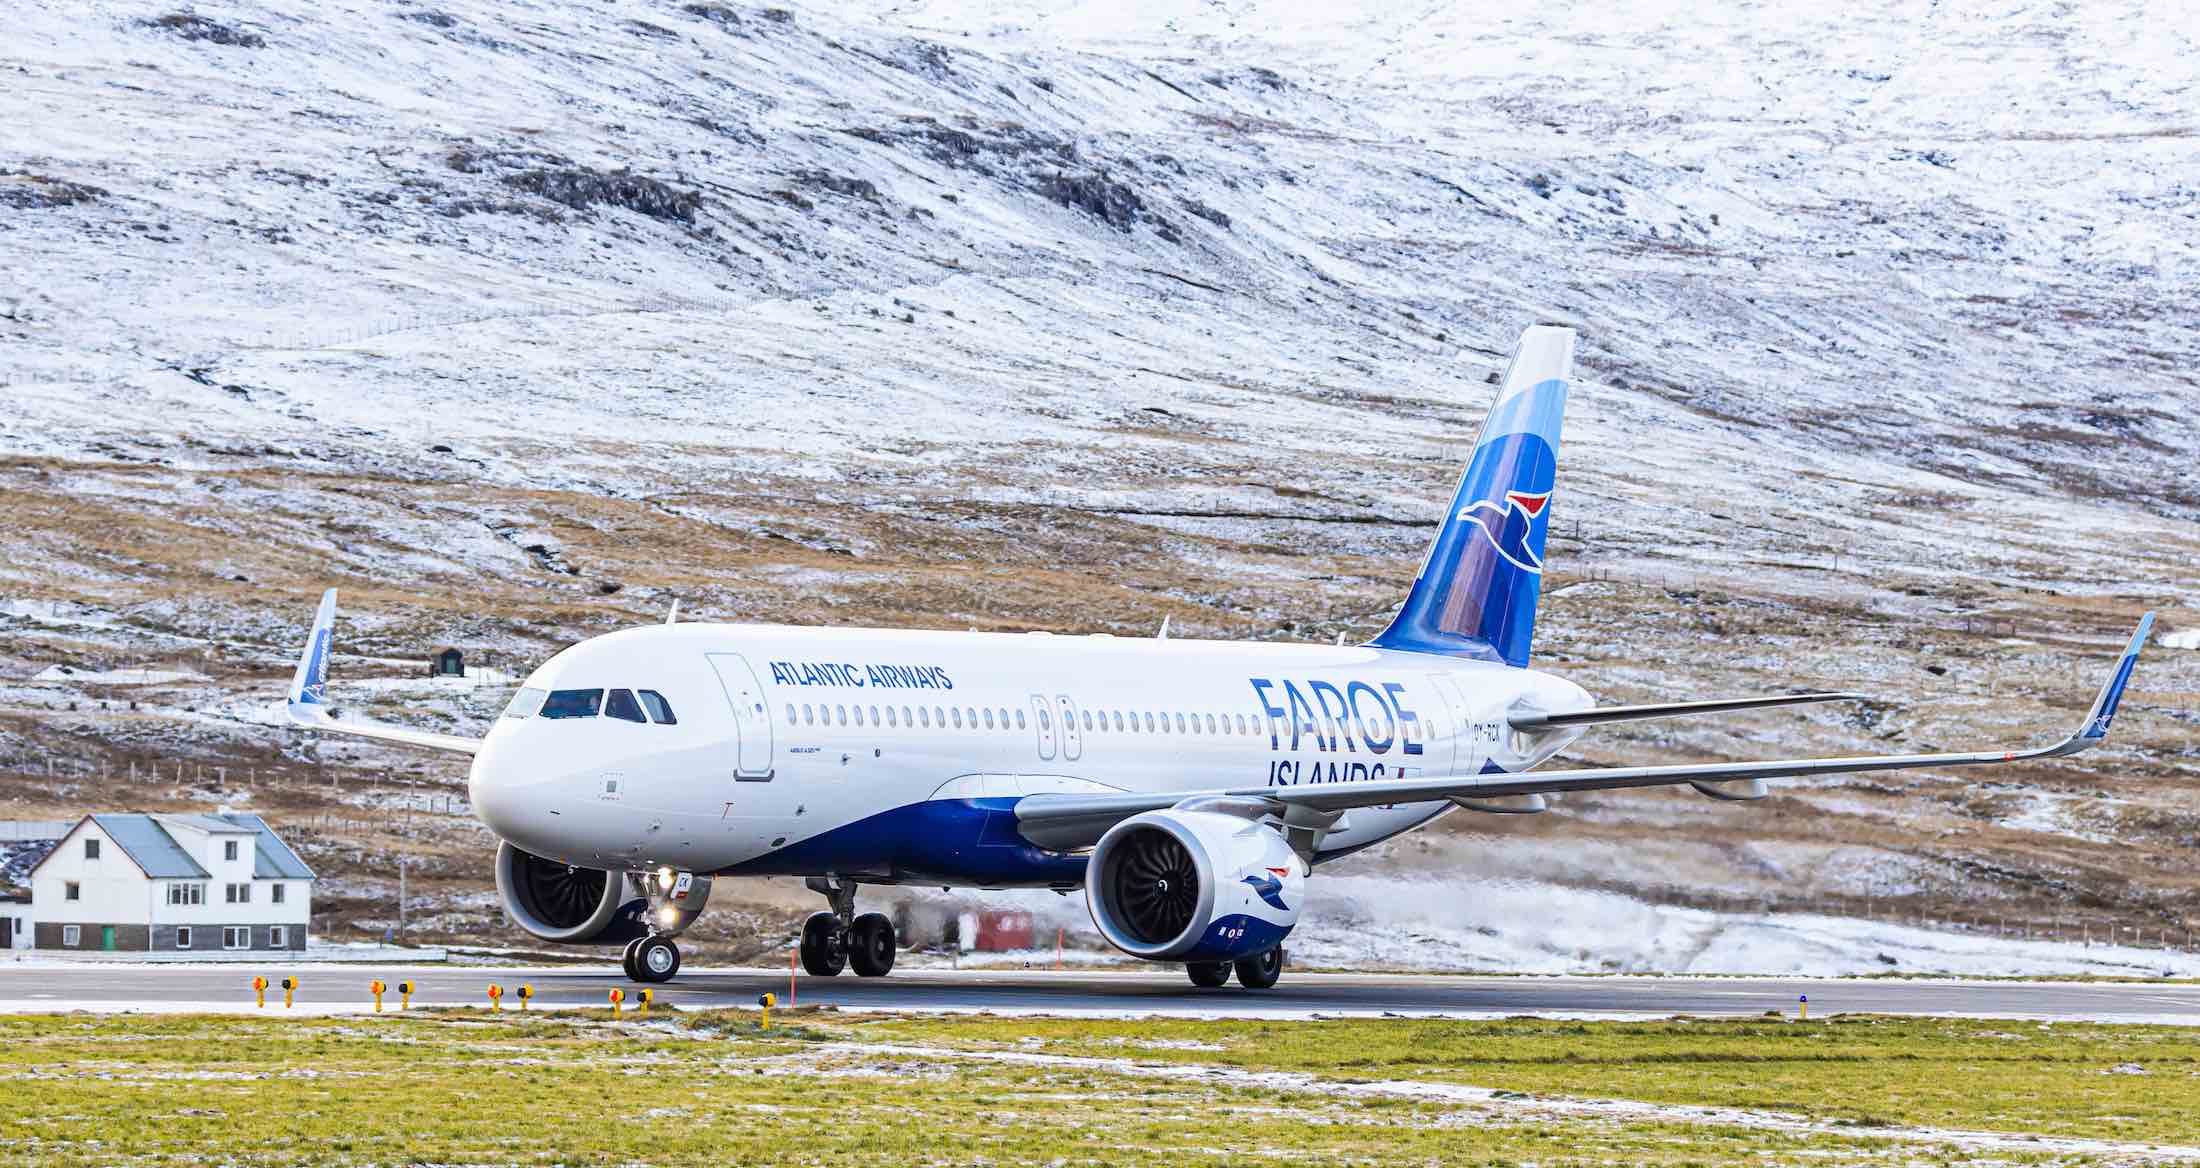 a plane on a runway with snow covered mountains in the background